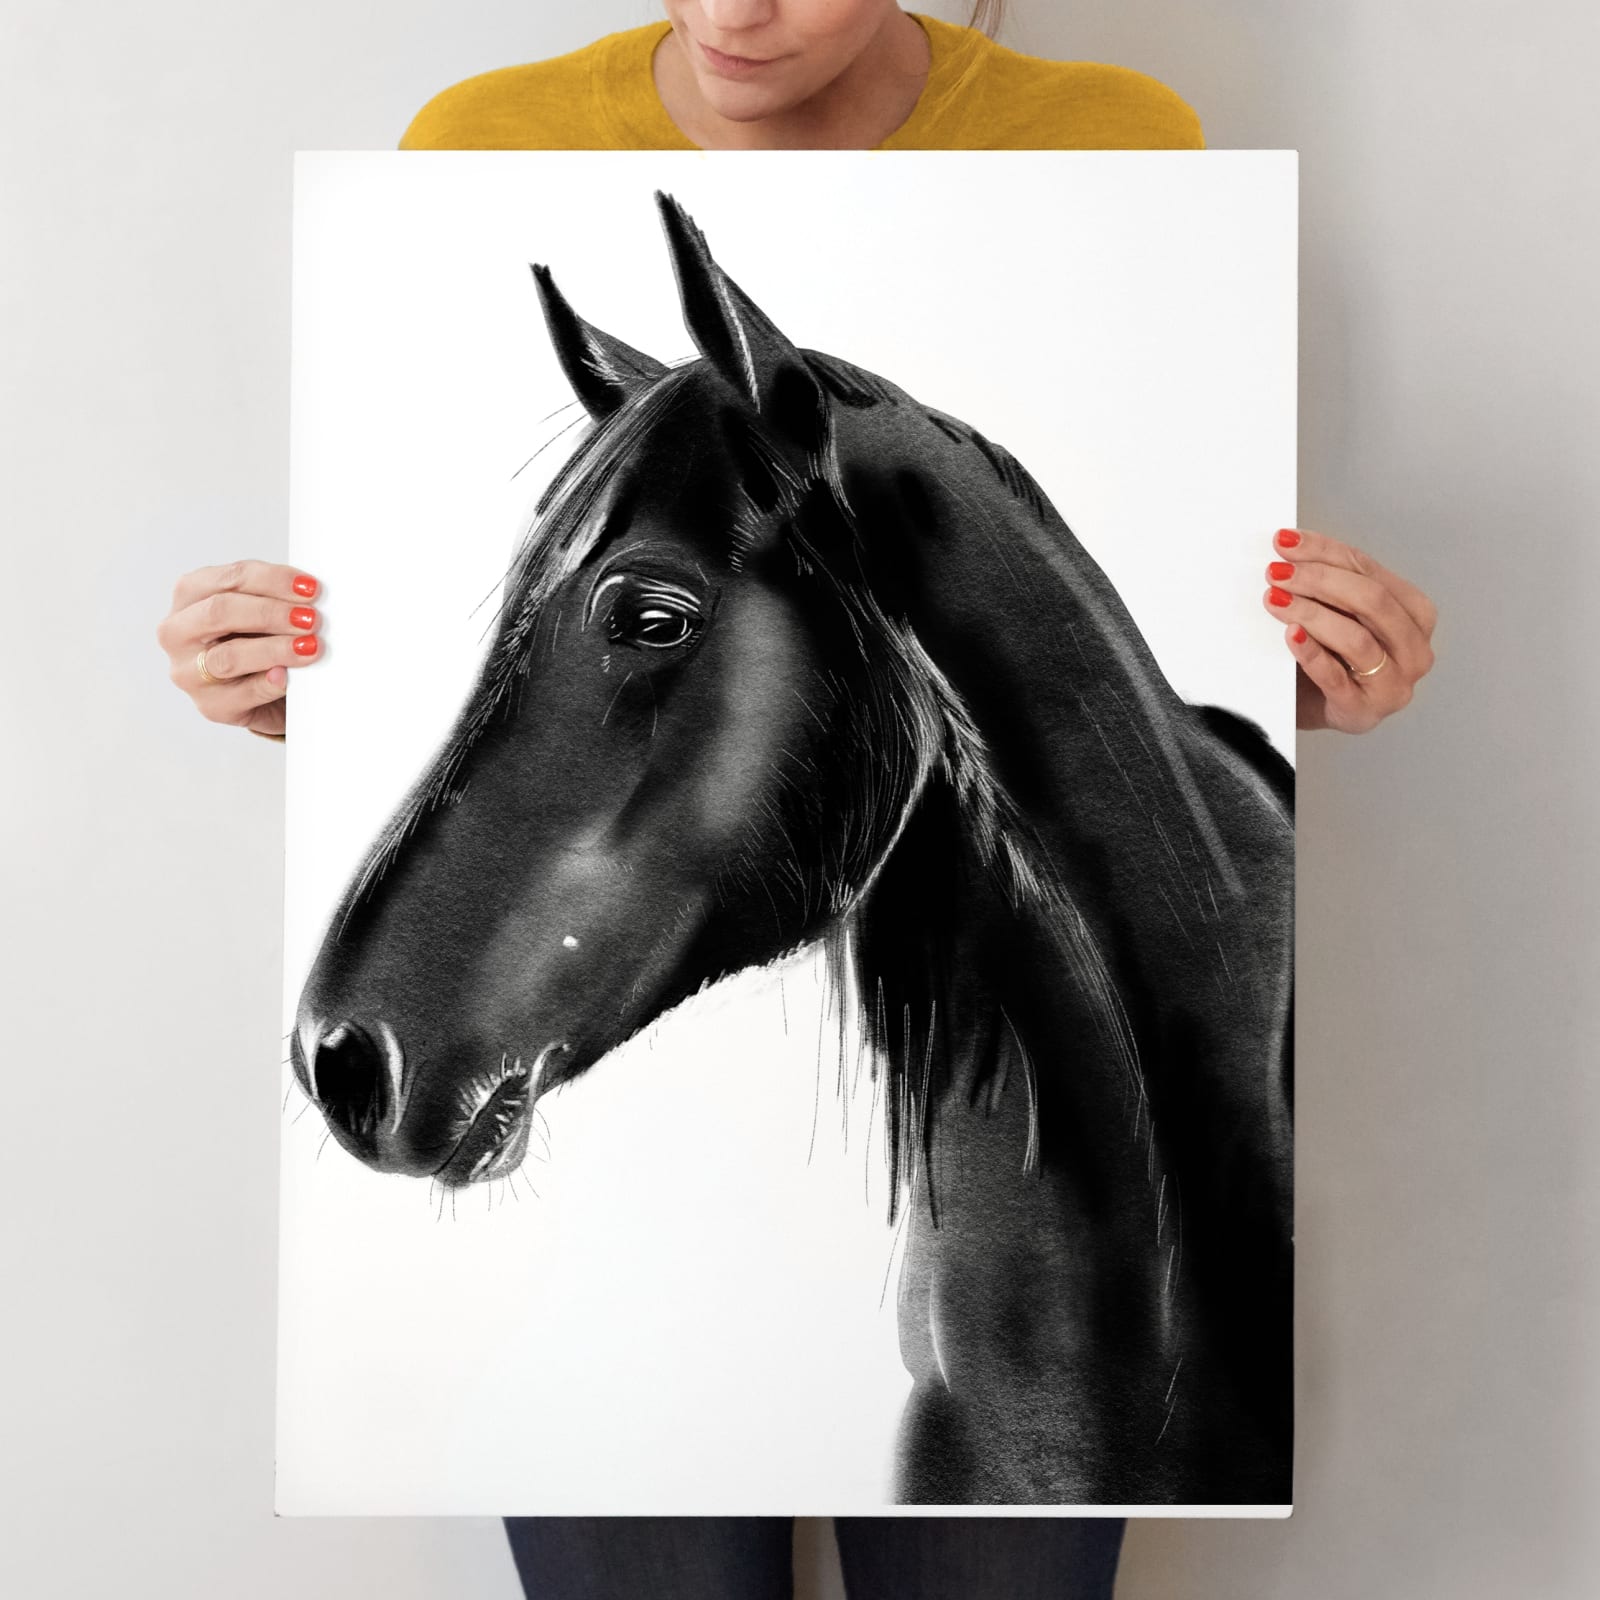 How to Draw a Horse with Charcoal